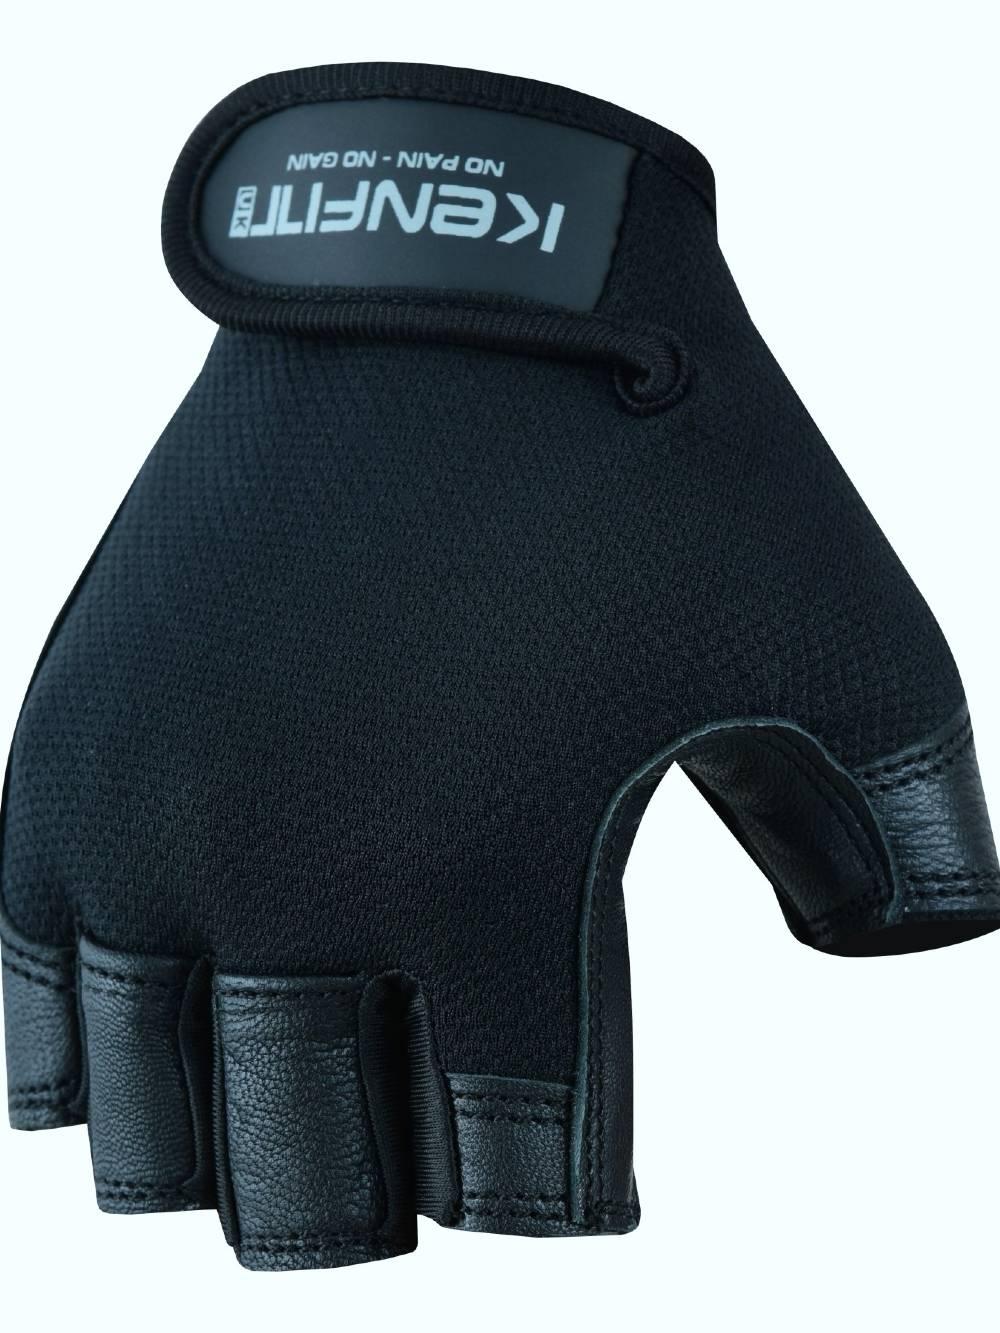 Half finger , Cycling, Gym gloves Essential fitness Gear, Bodybuilding Workout, Smart-beautiful for Men and Women